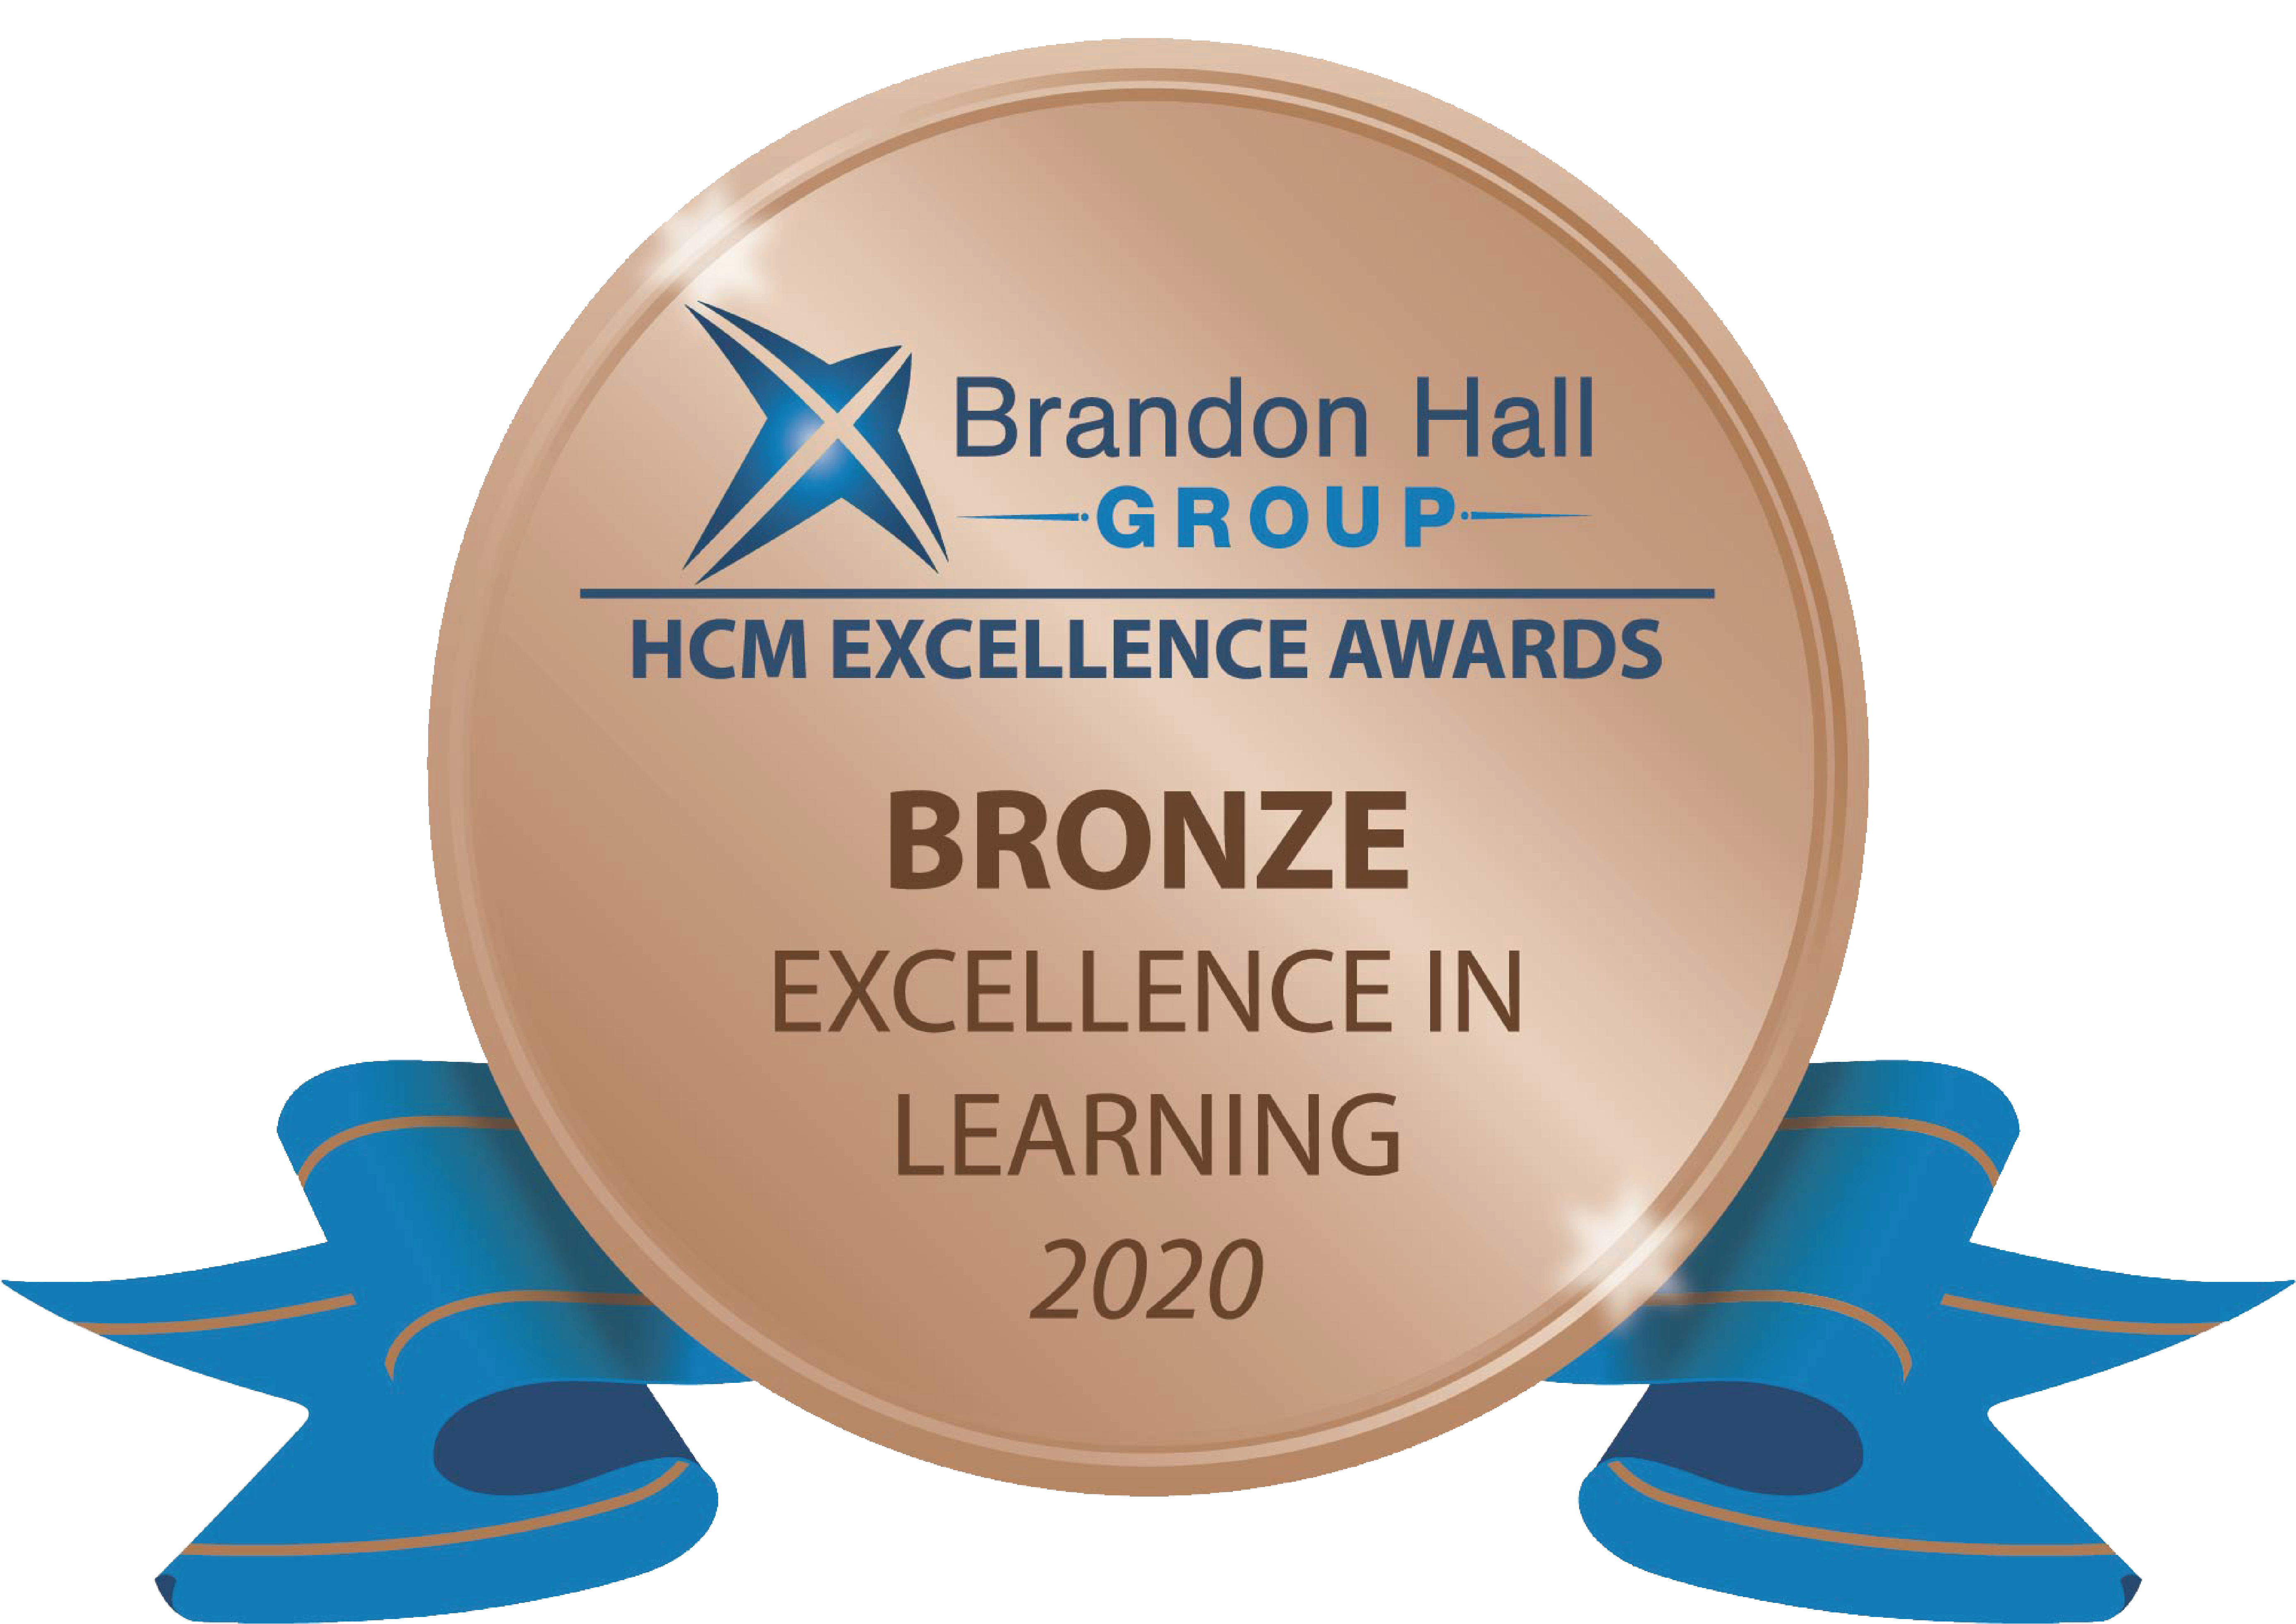 Bronze medal for Excellence in Learning 2020